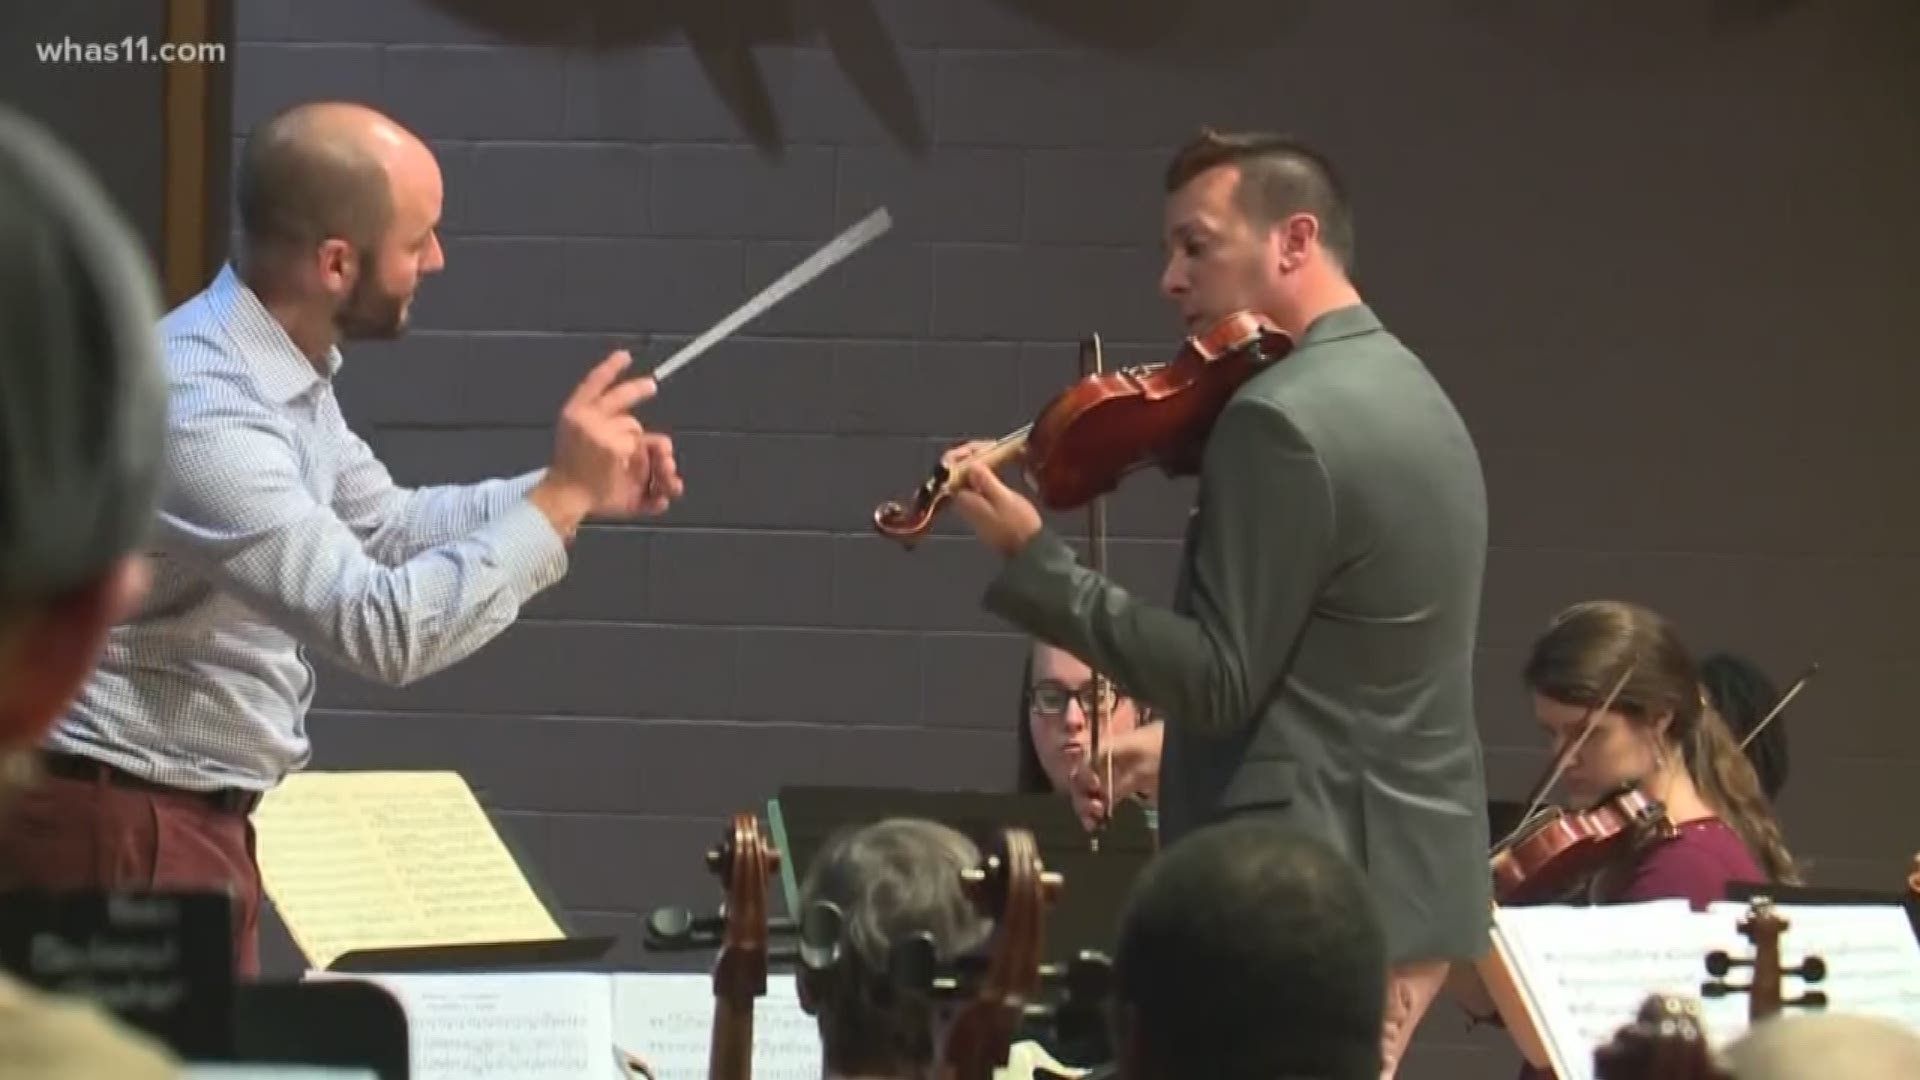 It's gone under a few different names in its history; but, in one form or another the Louisville Civic Orchestra has been bringing passions together and music to the masses in Kentuckiana for more than a century.